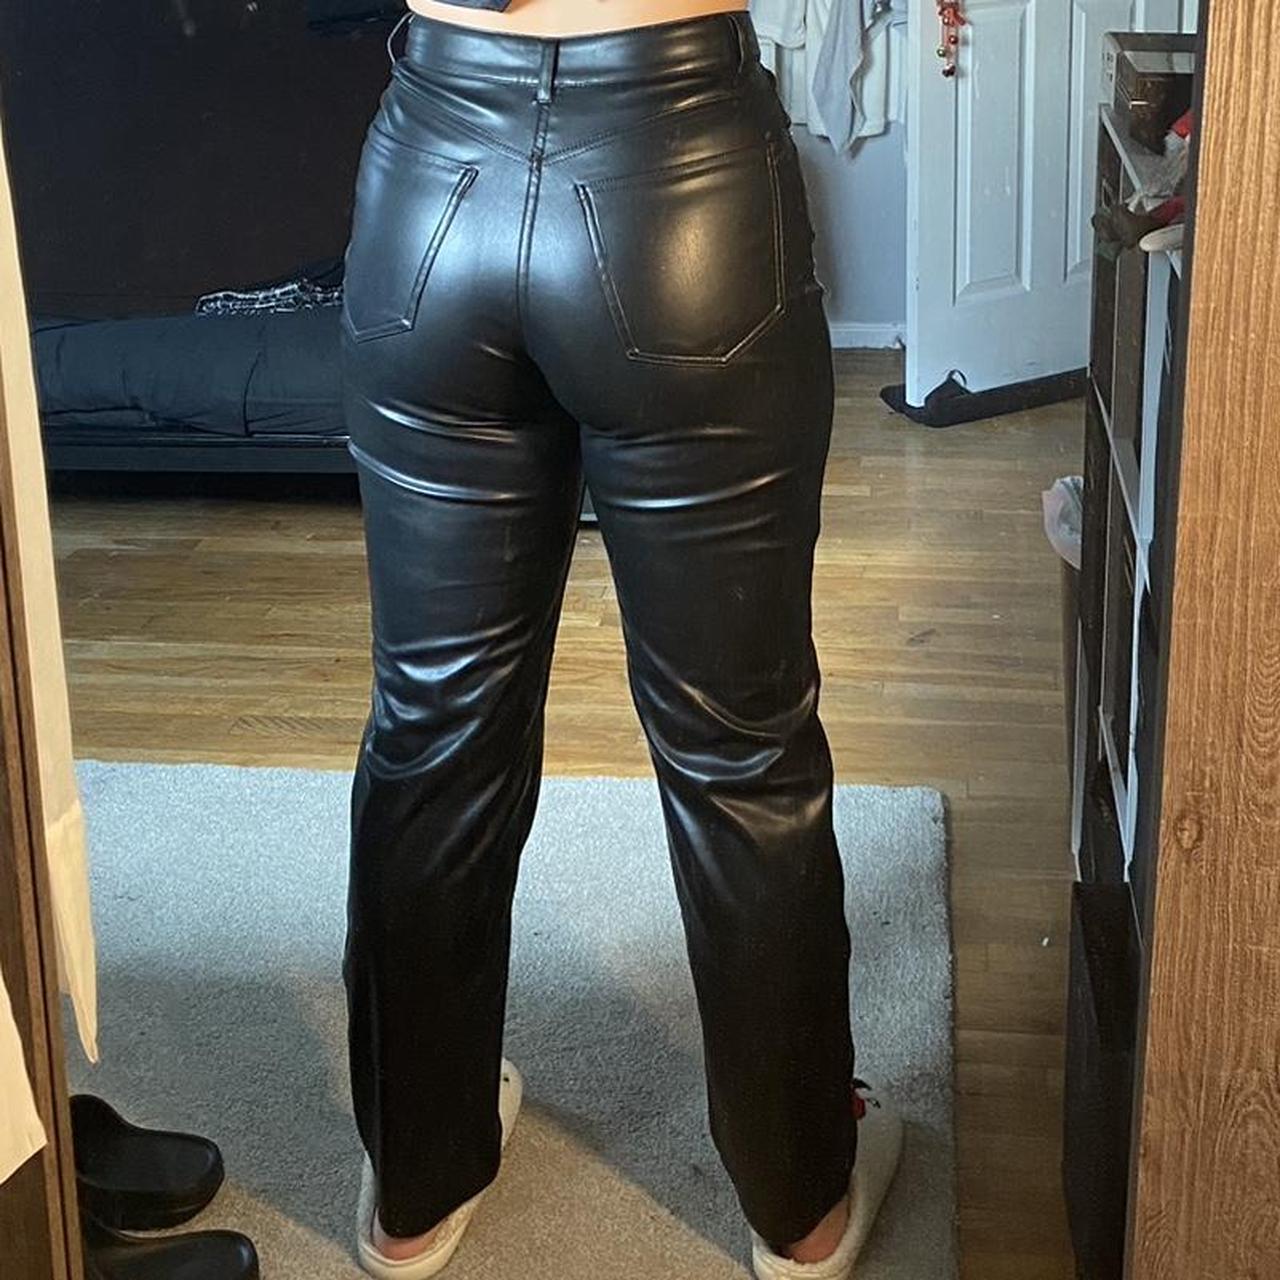 H&M leather pants for sale! These are ADORABLE. Are